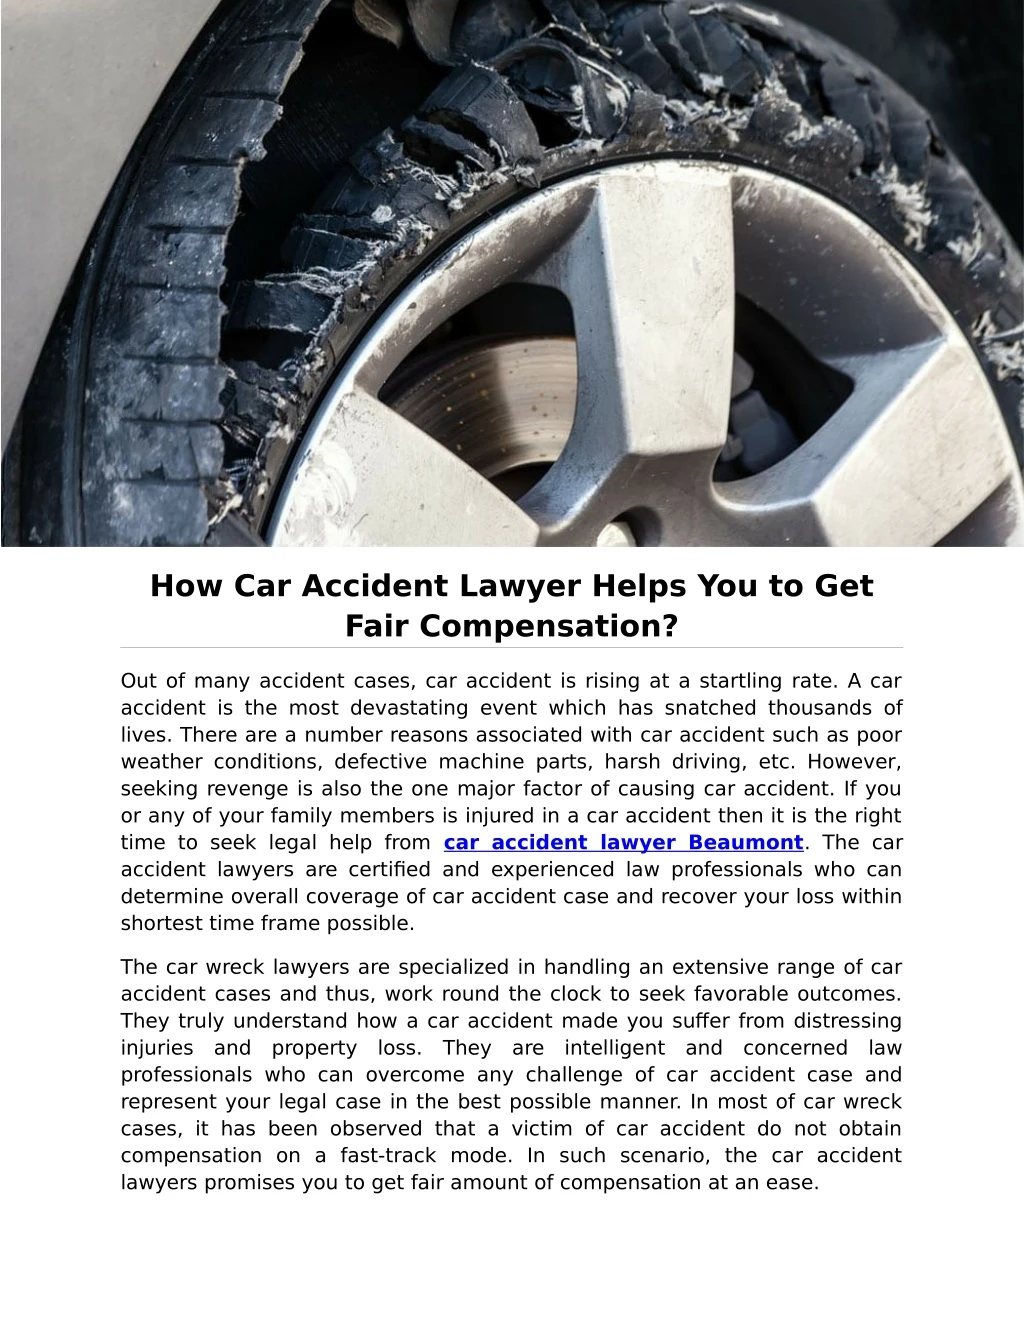 how car accident lawyer helps you to get fair